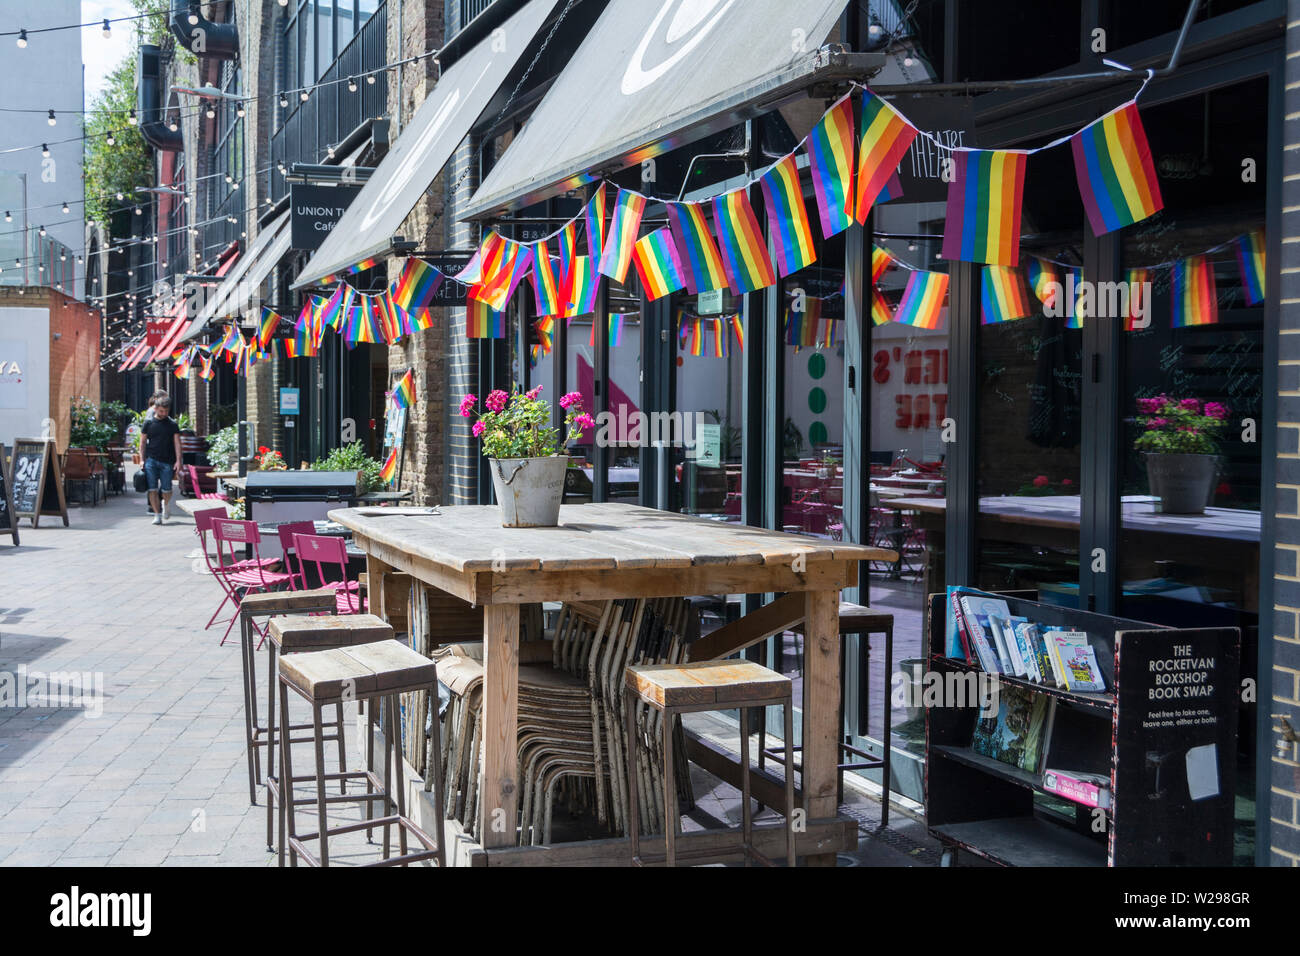 Pride's LBGT Rainbow flag and bunting at the Old Union Yard Arches foodie-hub near Bankside, Southwark, London, SE1, UK Stock Photo